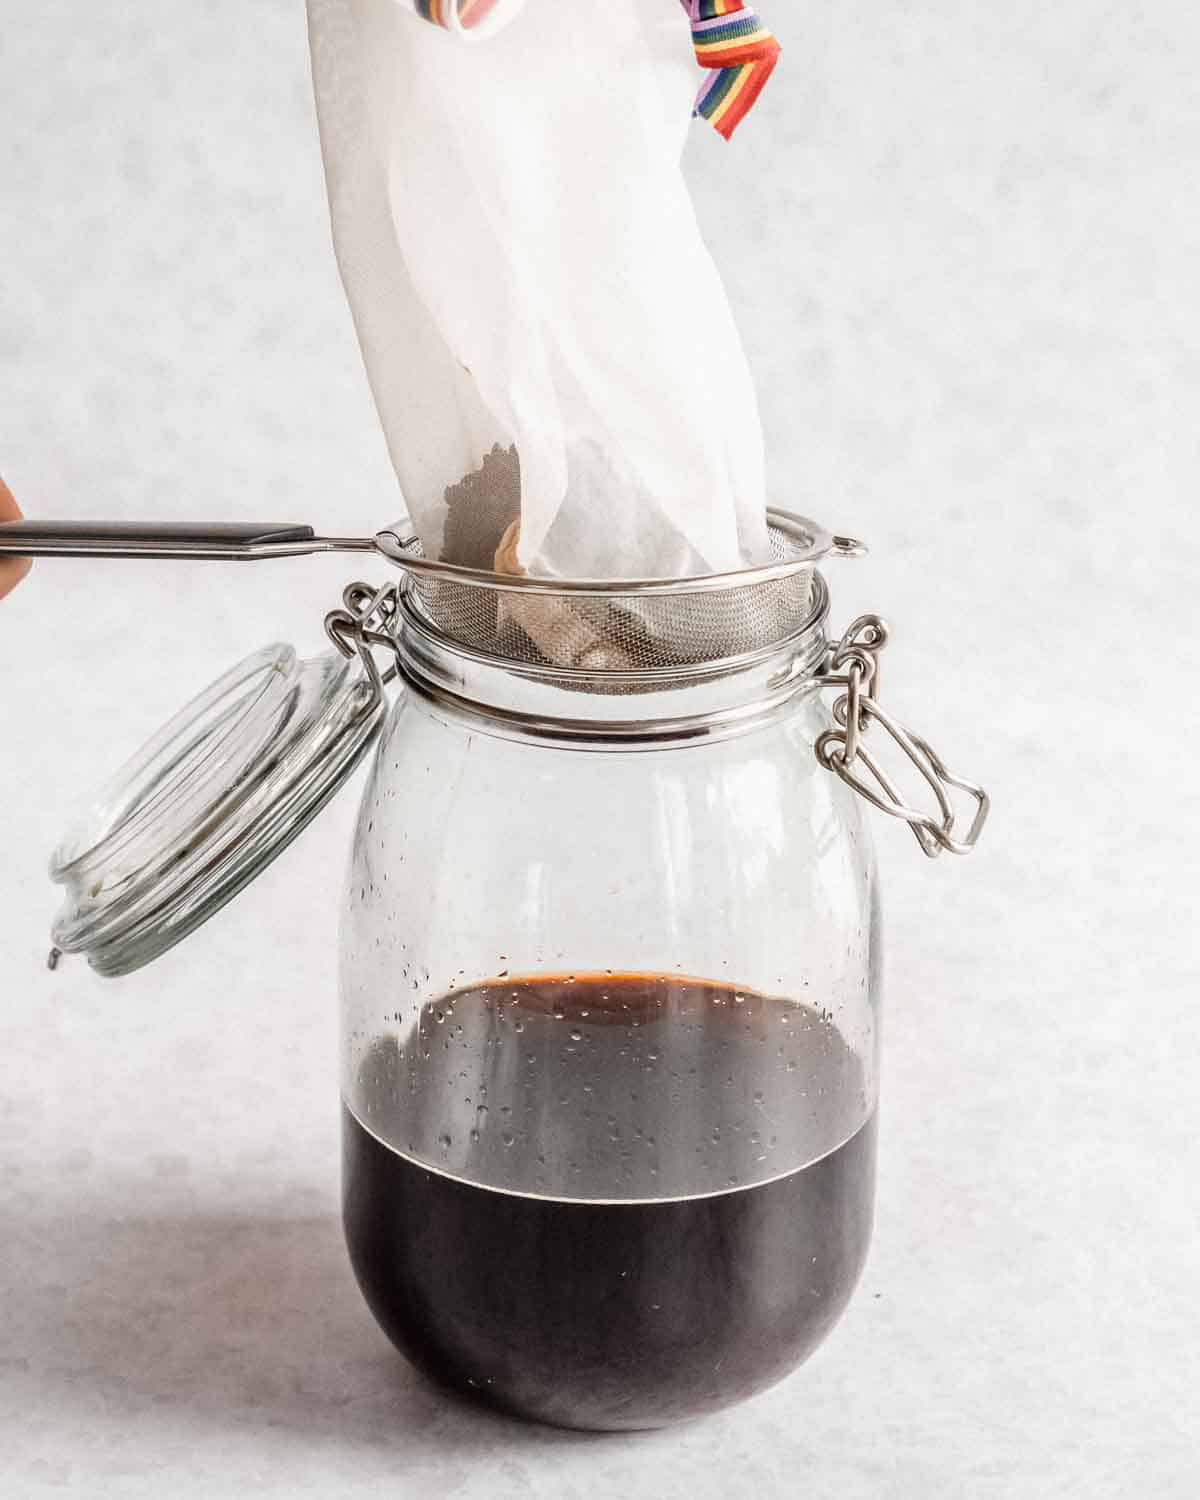 cold brew concentrate in a new glass jar, the coffee grounds being left behind in the sieve.